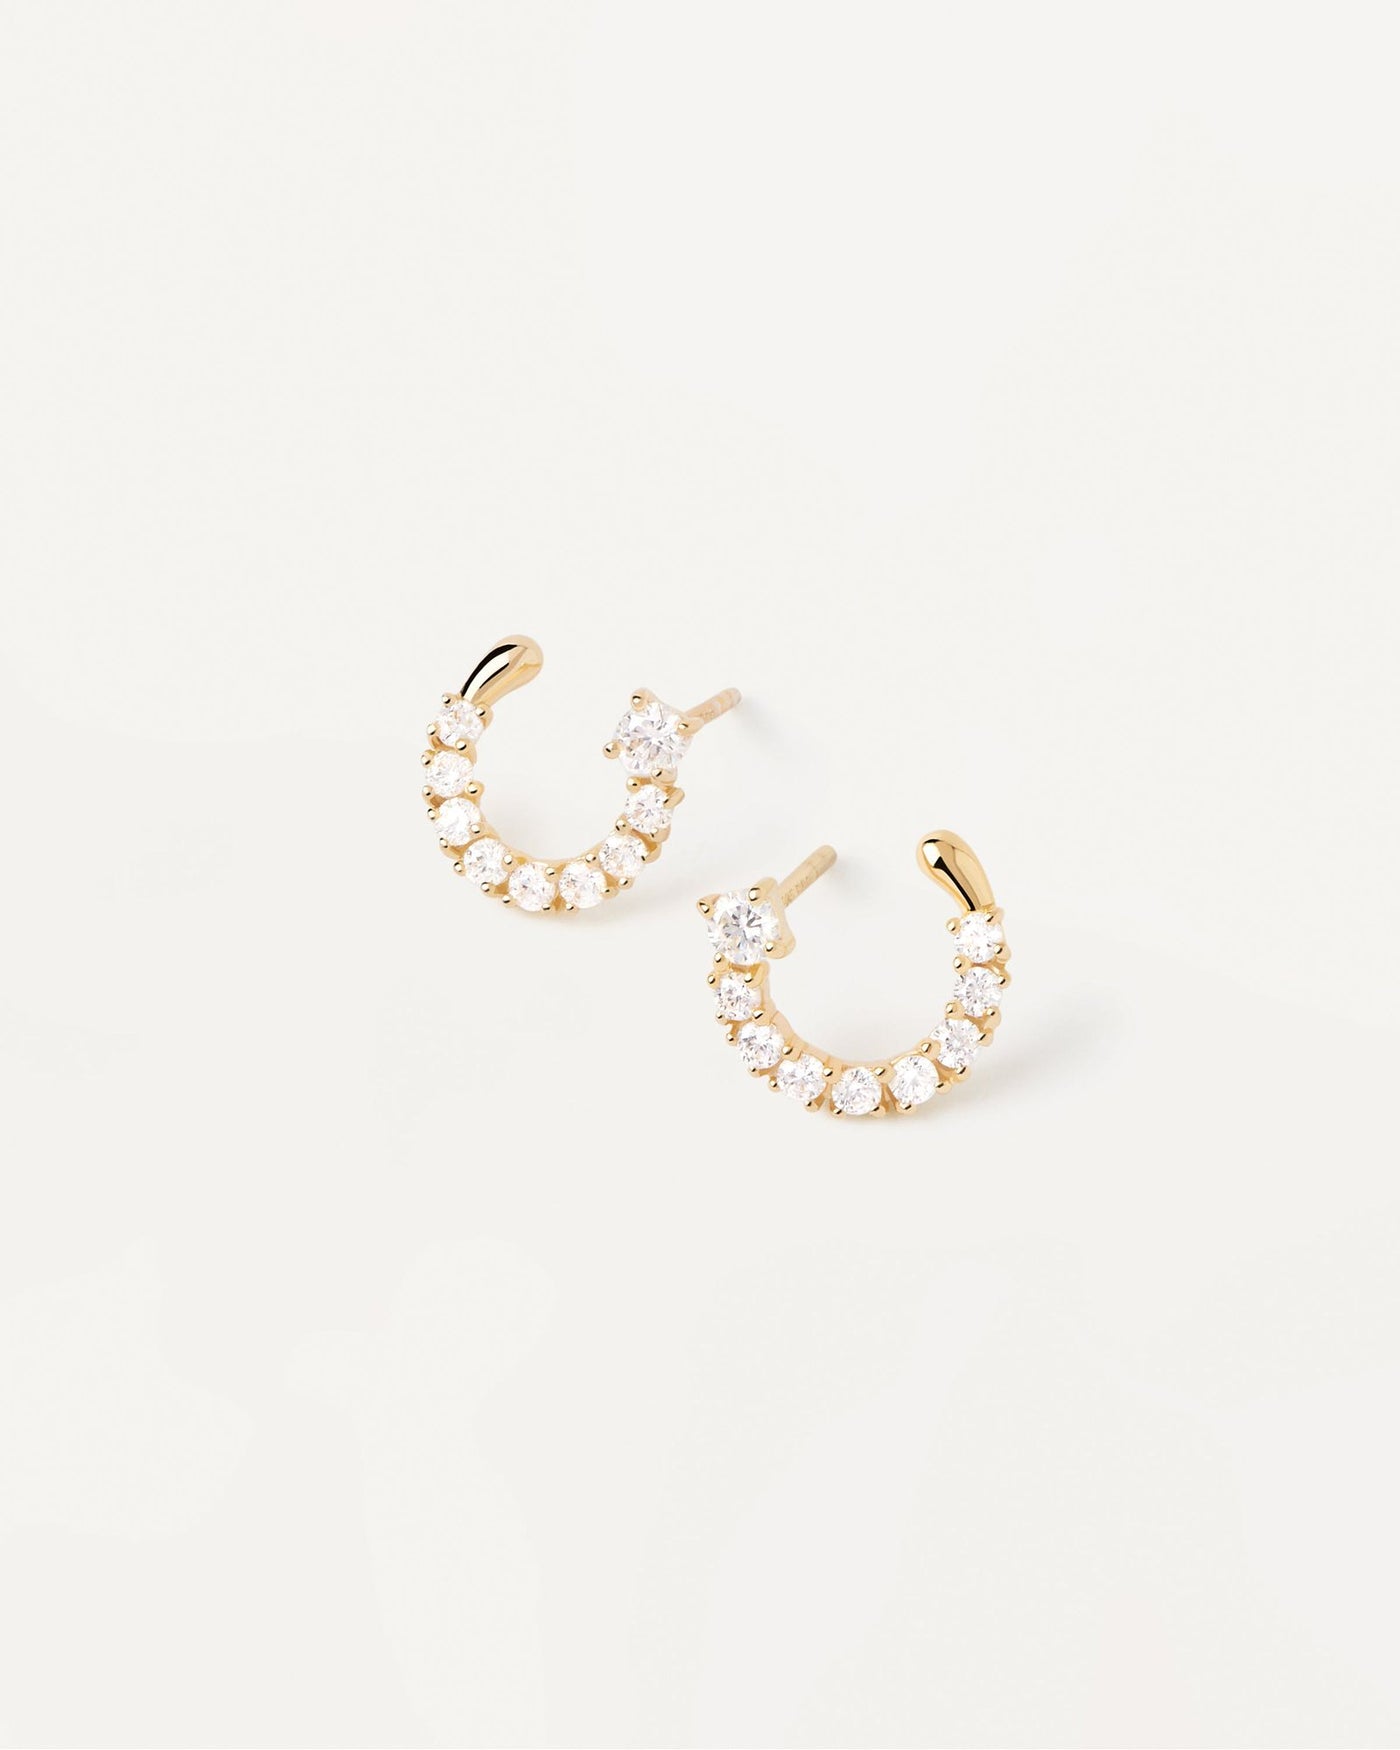 2024 Selection | Leona Earrings. Semi-circle small earrings in gold-plated silver with white crystals. Get the latest arrival from PDPAOLA. Place your order safely and get this Best Seller. Free Shipping.